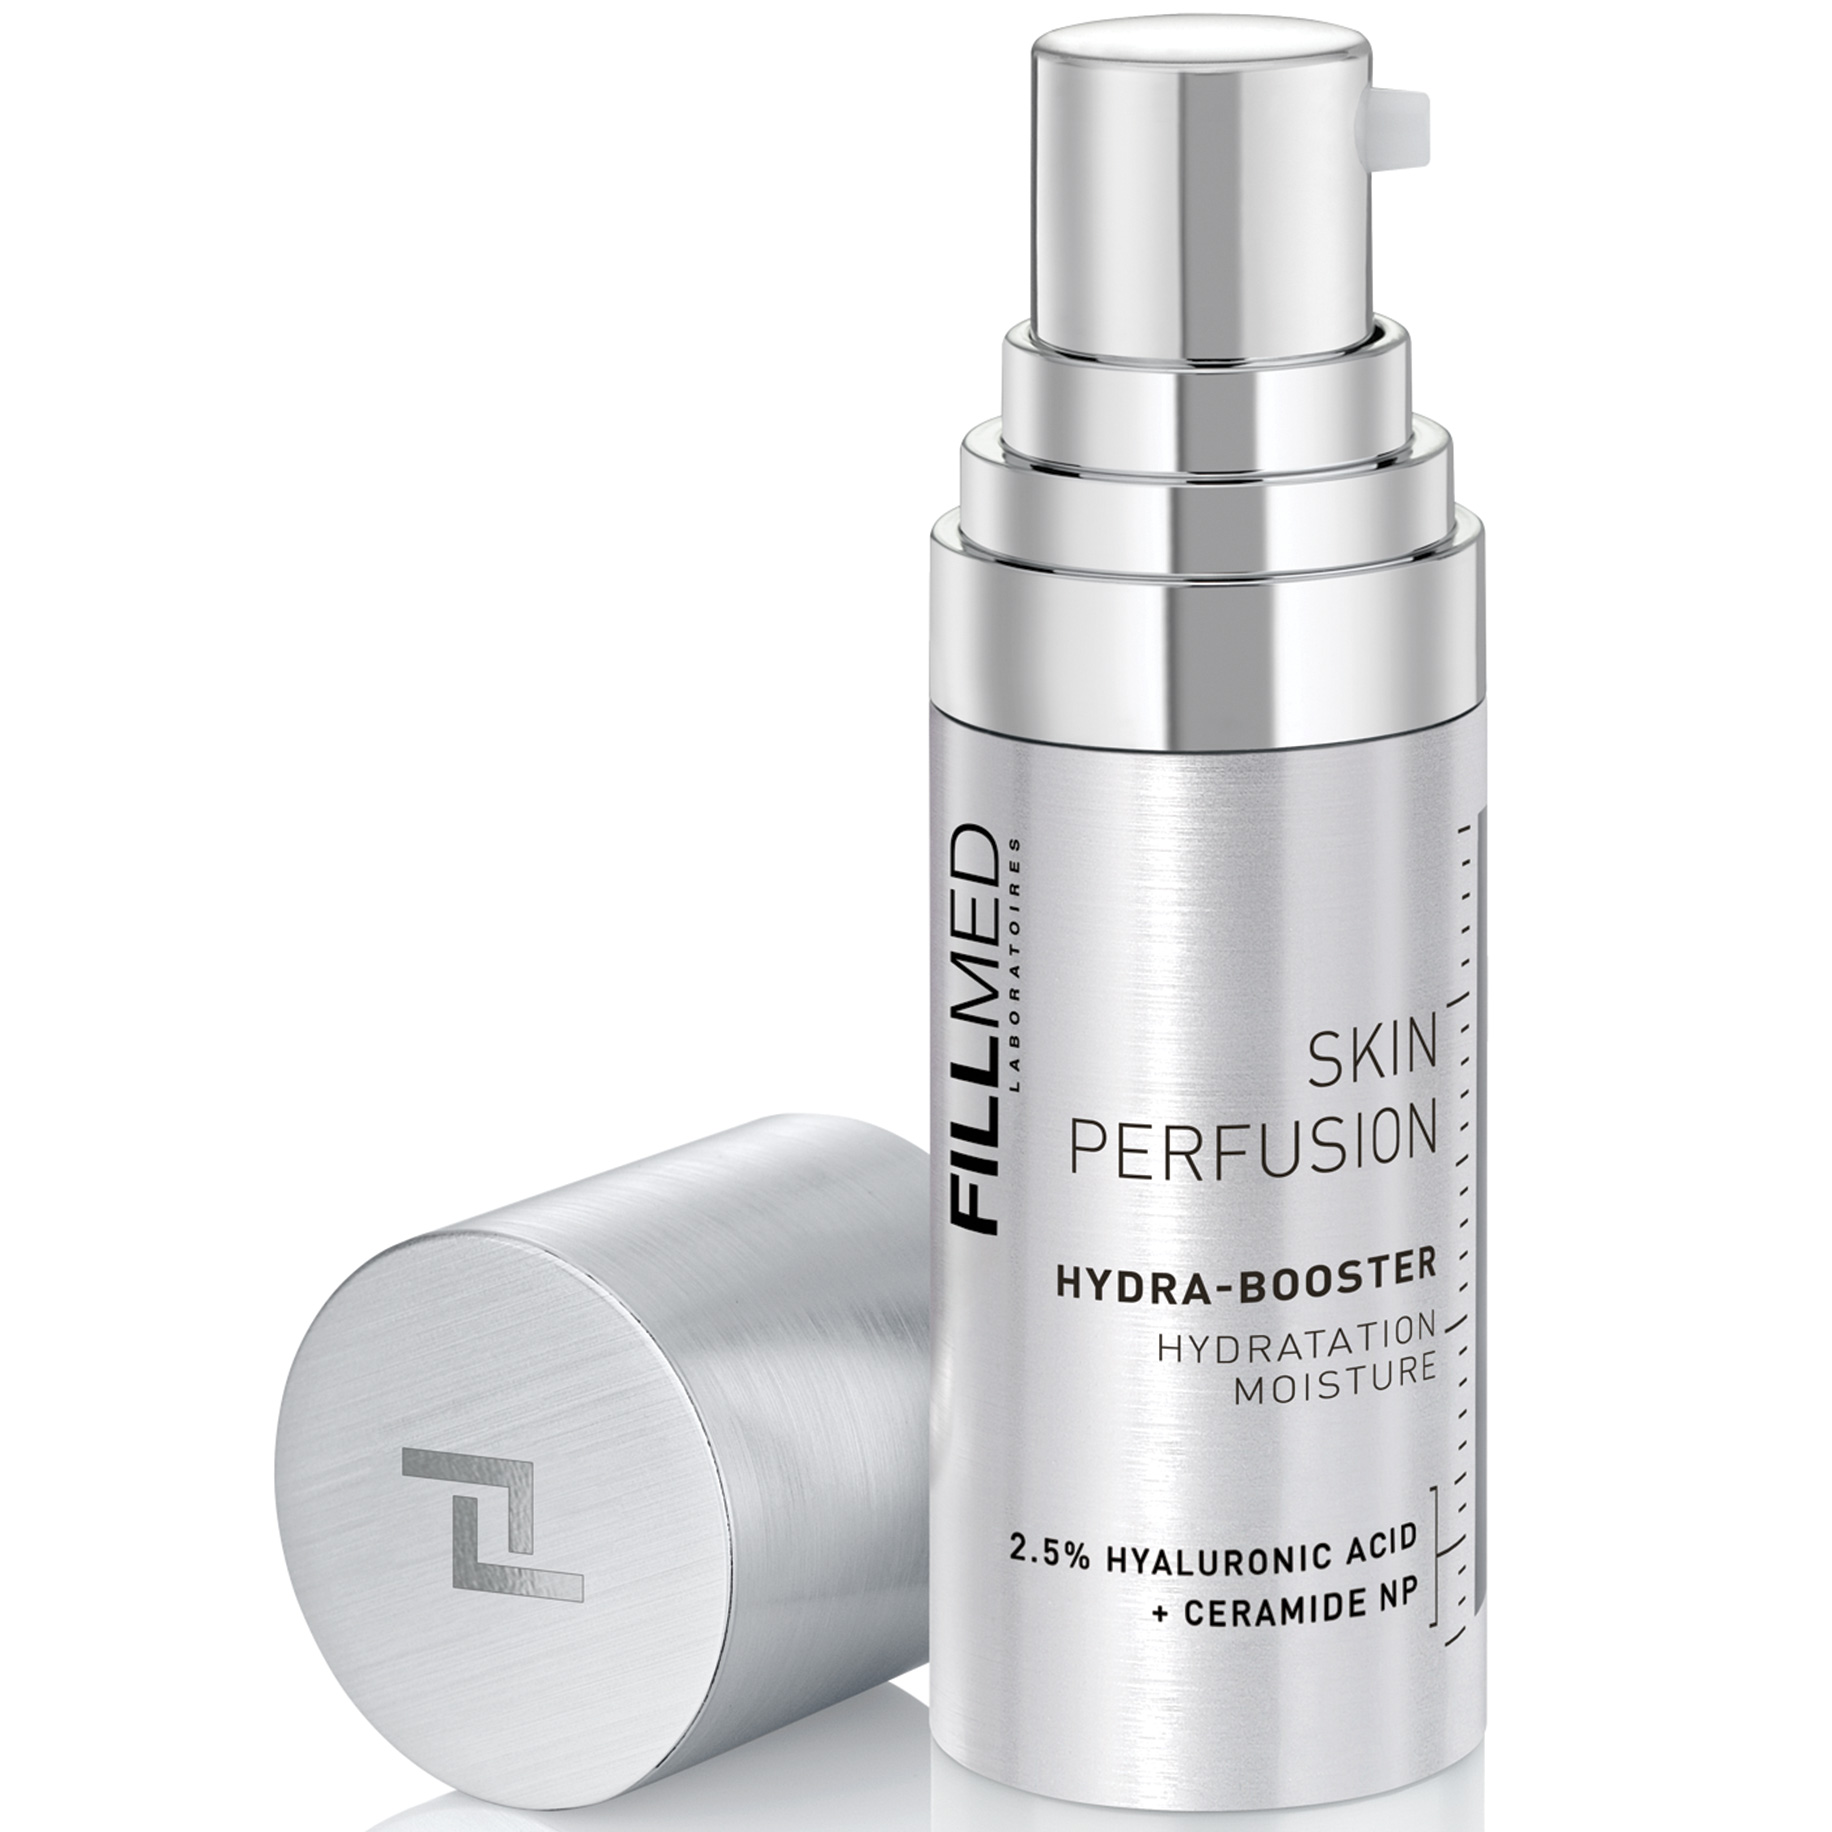 Fillmed Skin Perfusion Hydra-Booster 